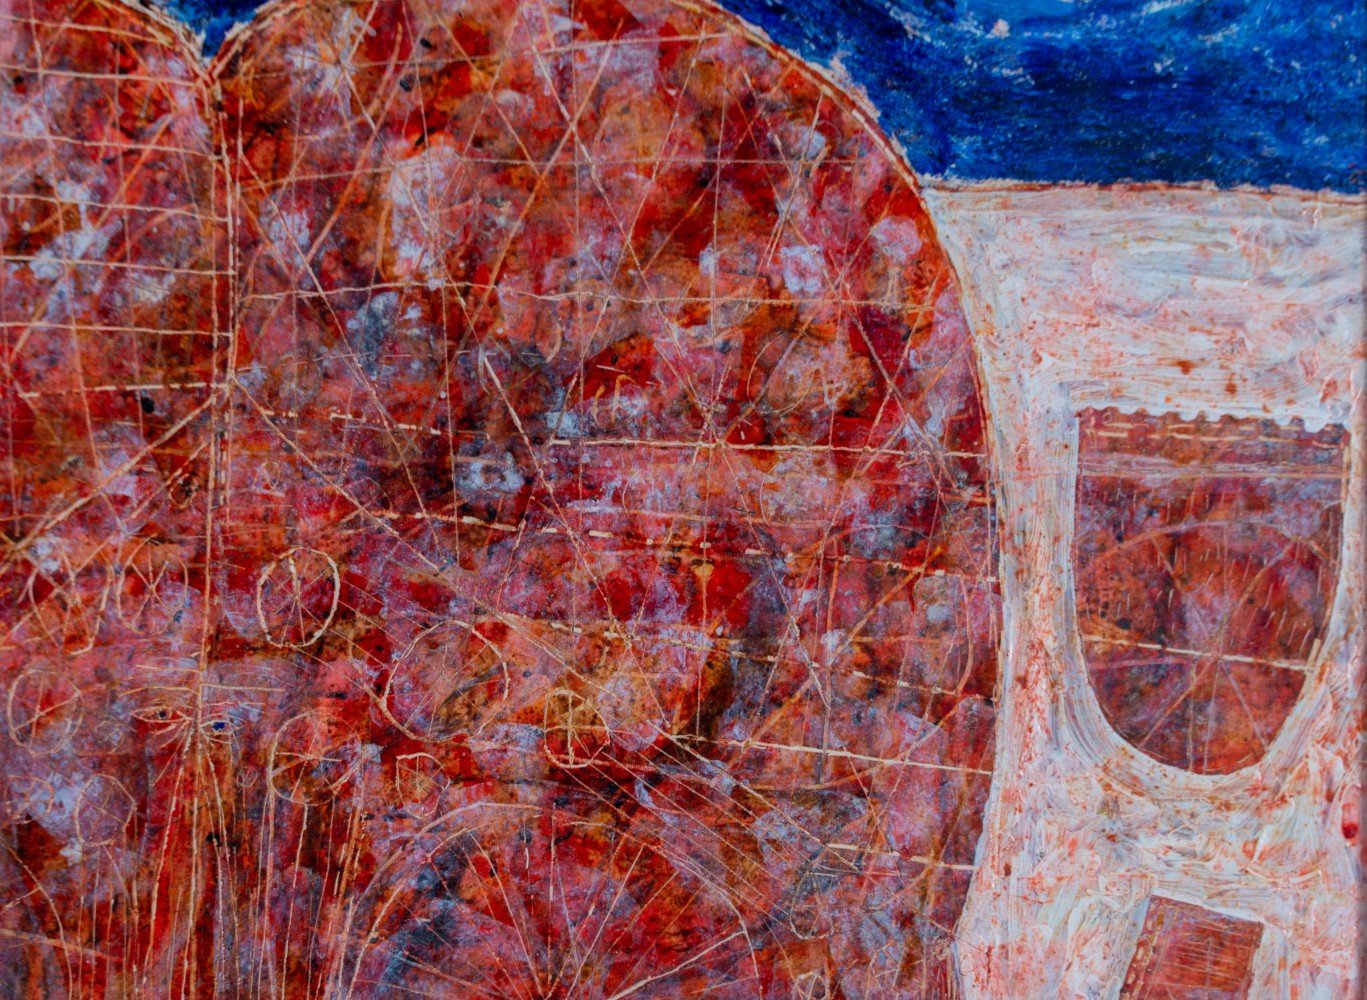 Abstract Figurative Encaustic and Sgraffito on Paper Painting: 